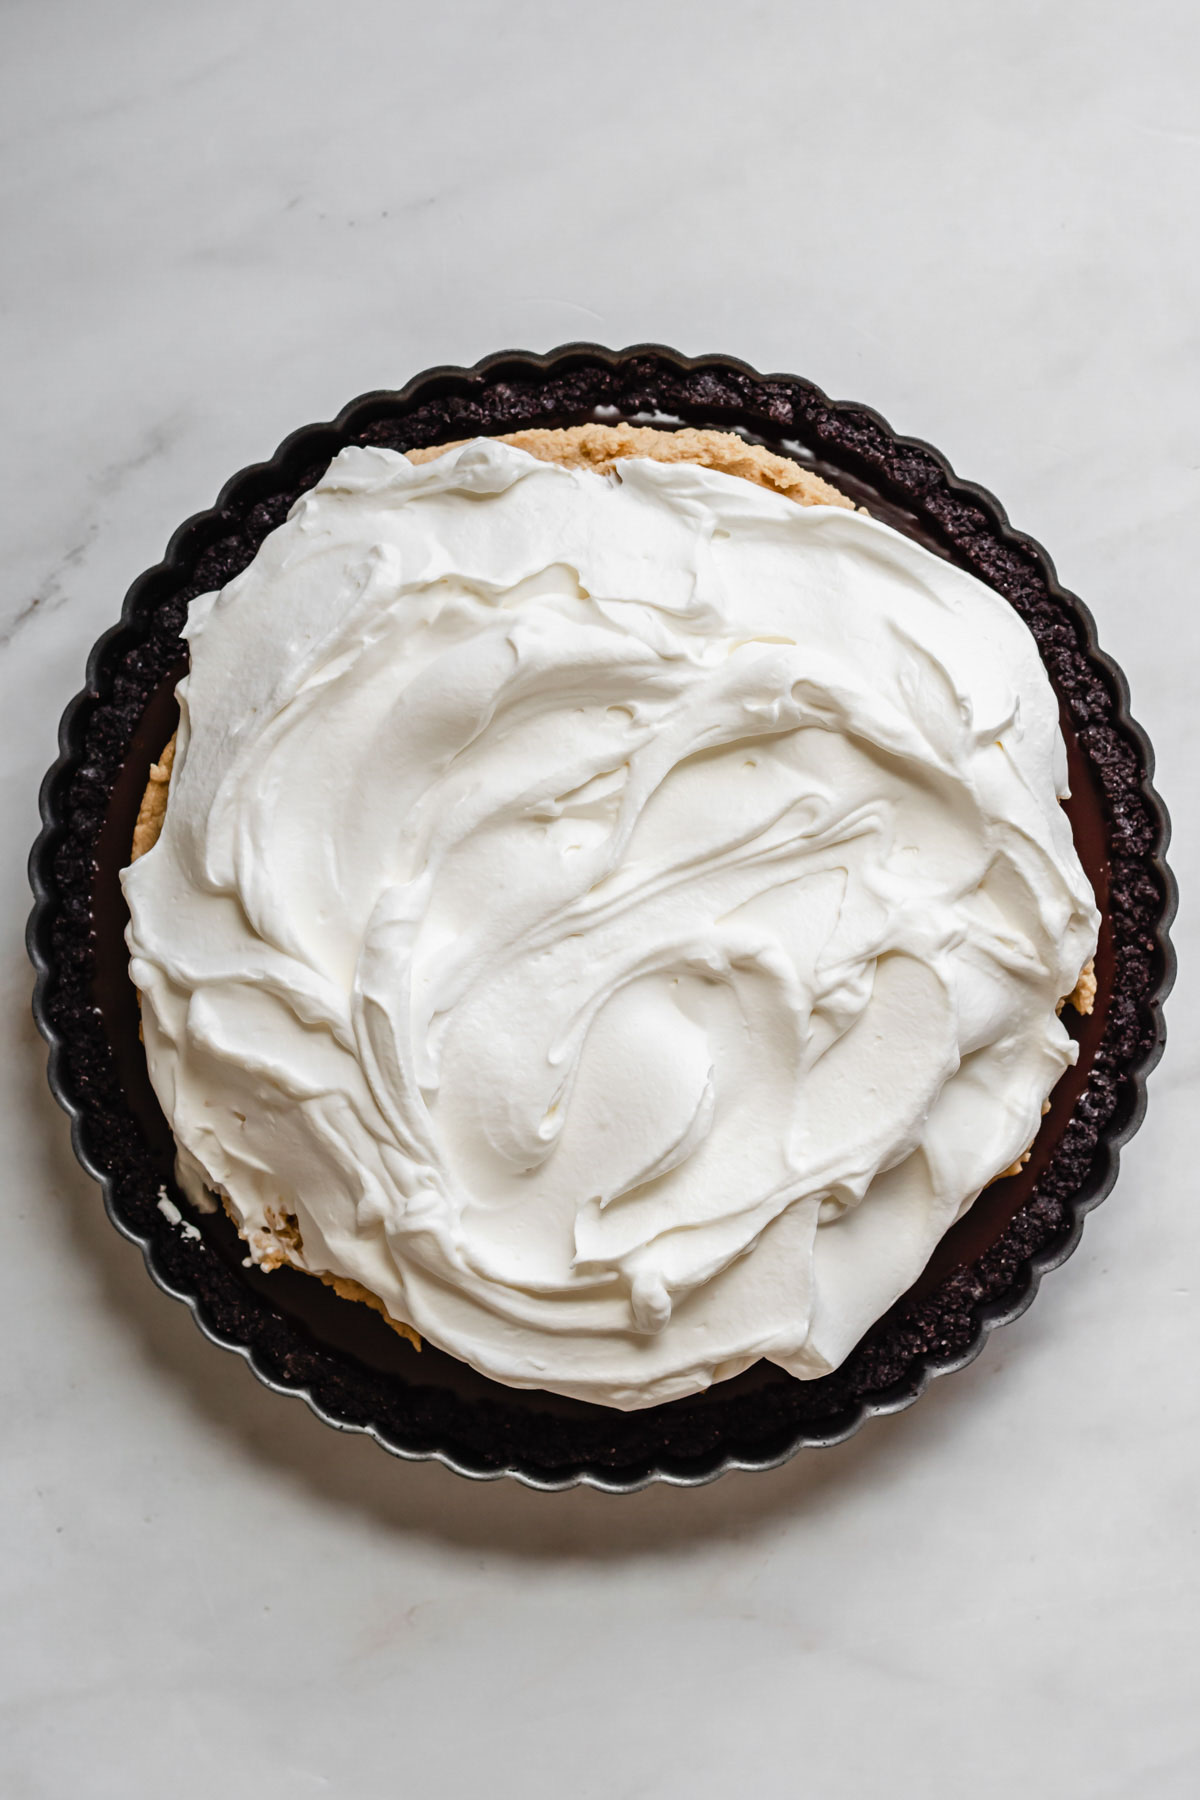 Tart with whipped cream spread on top.